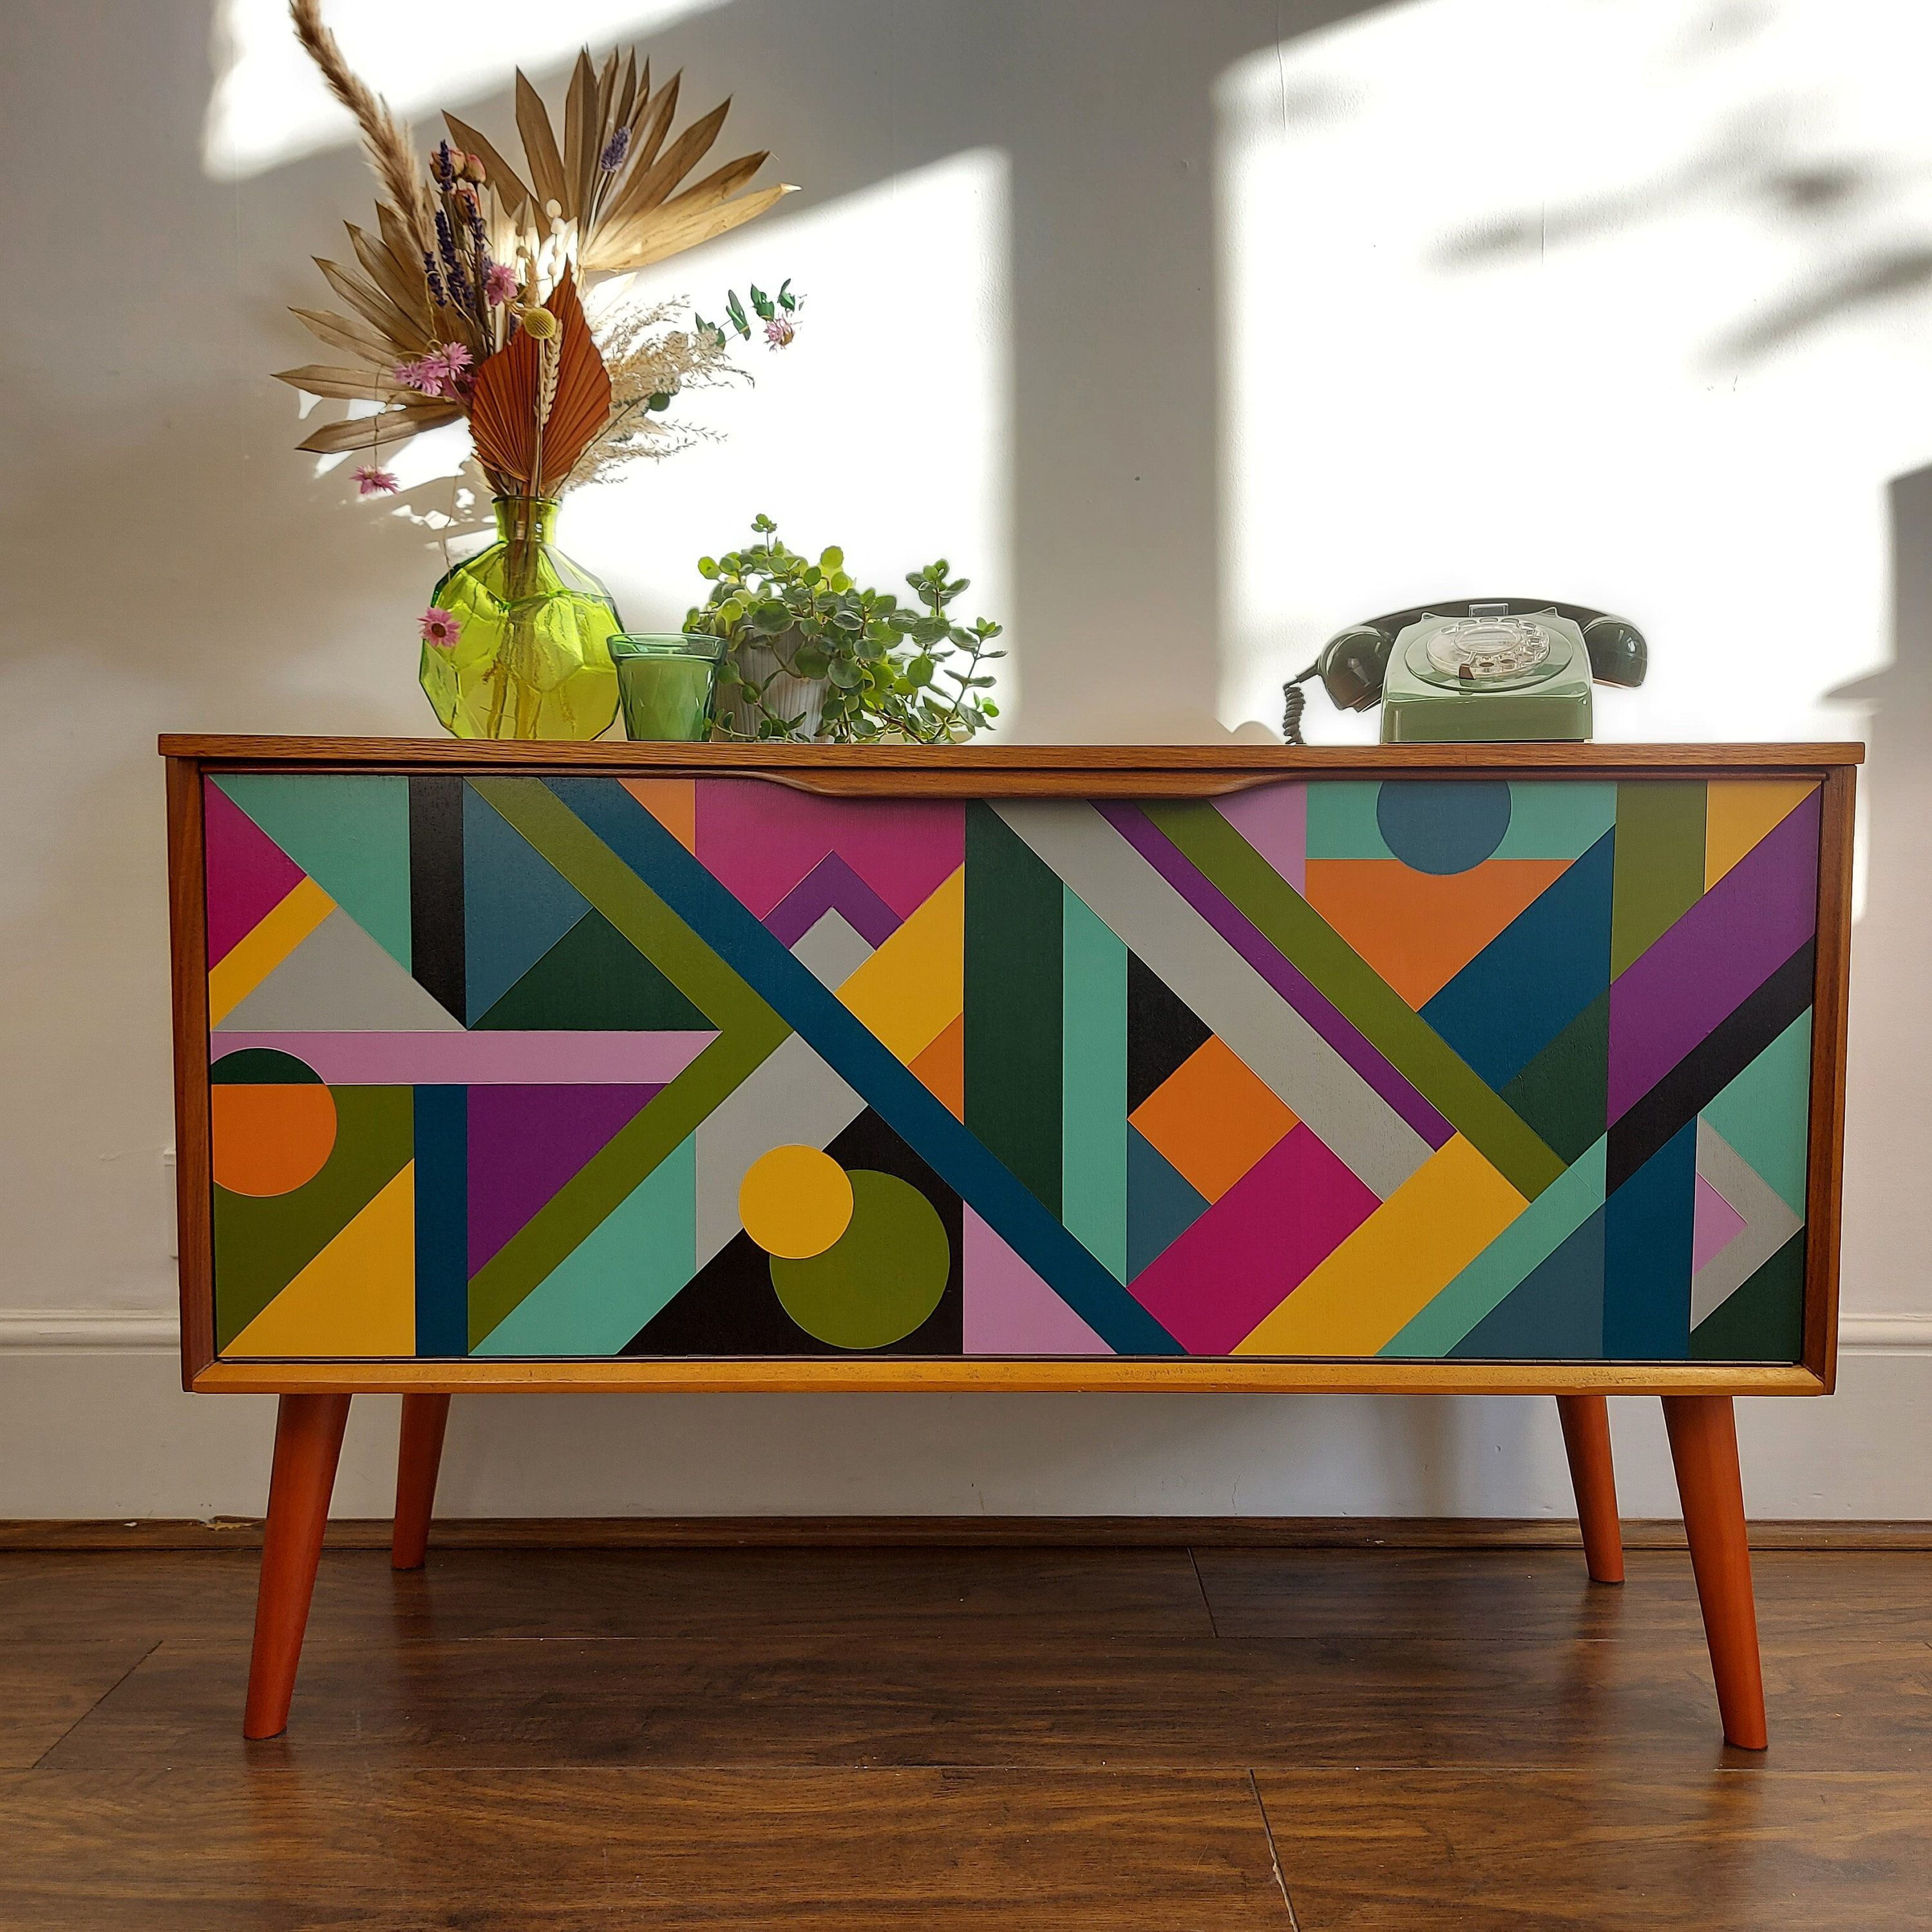 Sold Geometric Sideboard Hand Painted Credenza Up Cycled – Etsy In Geometric Sideboards (View 8 of 20)